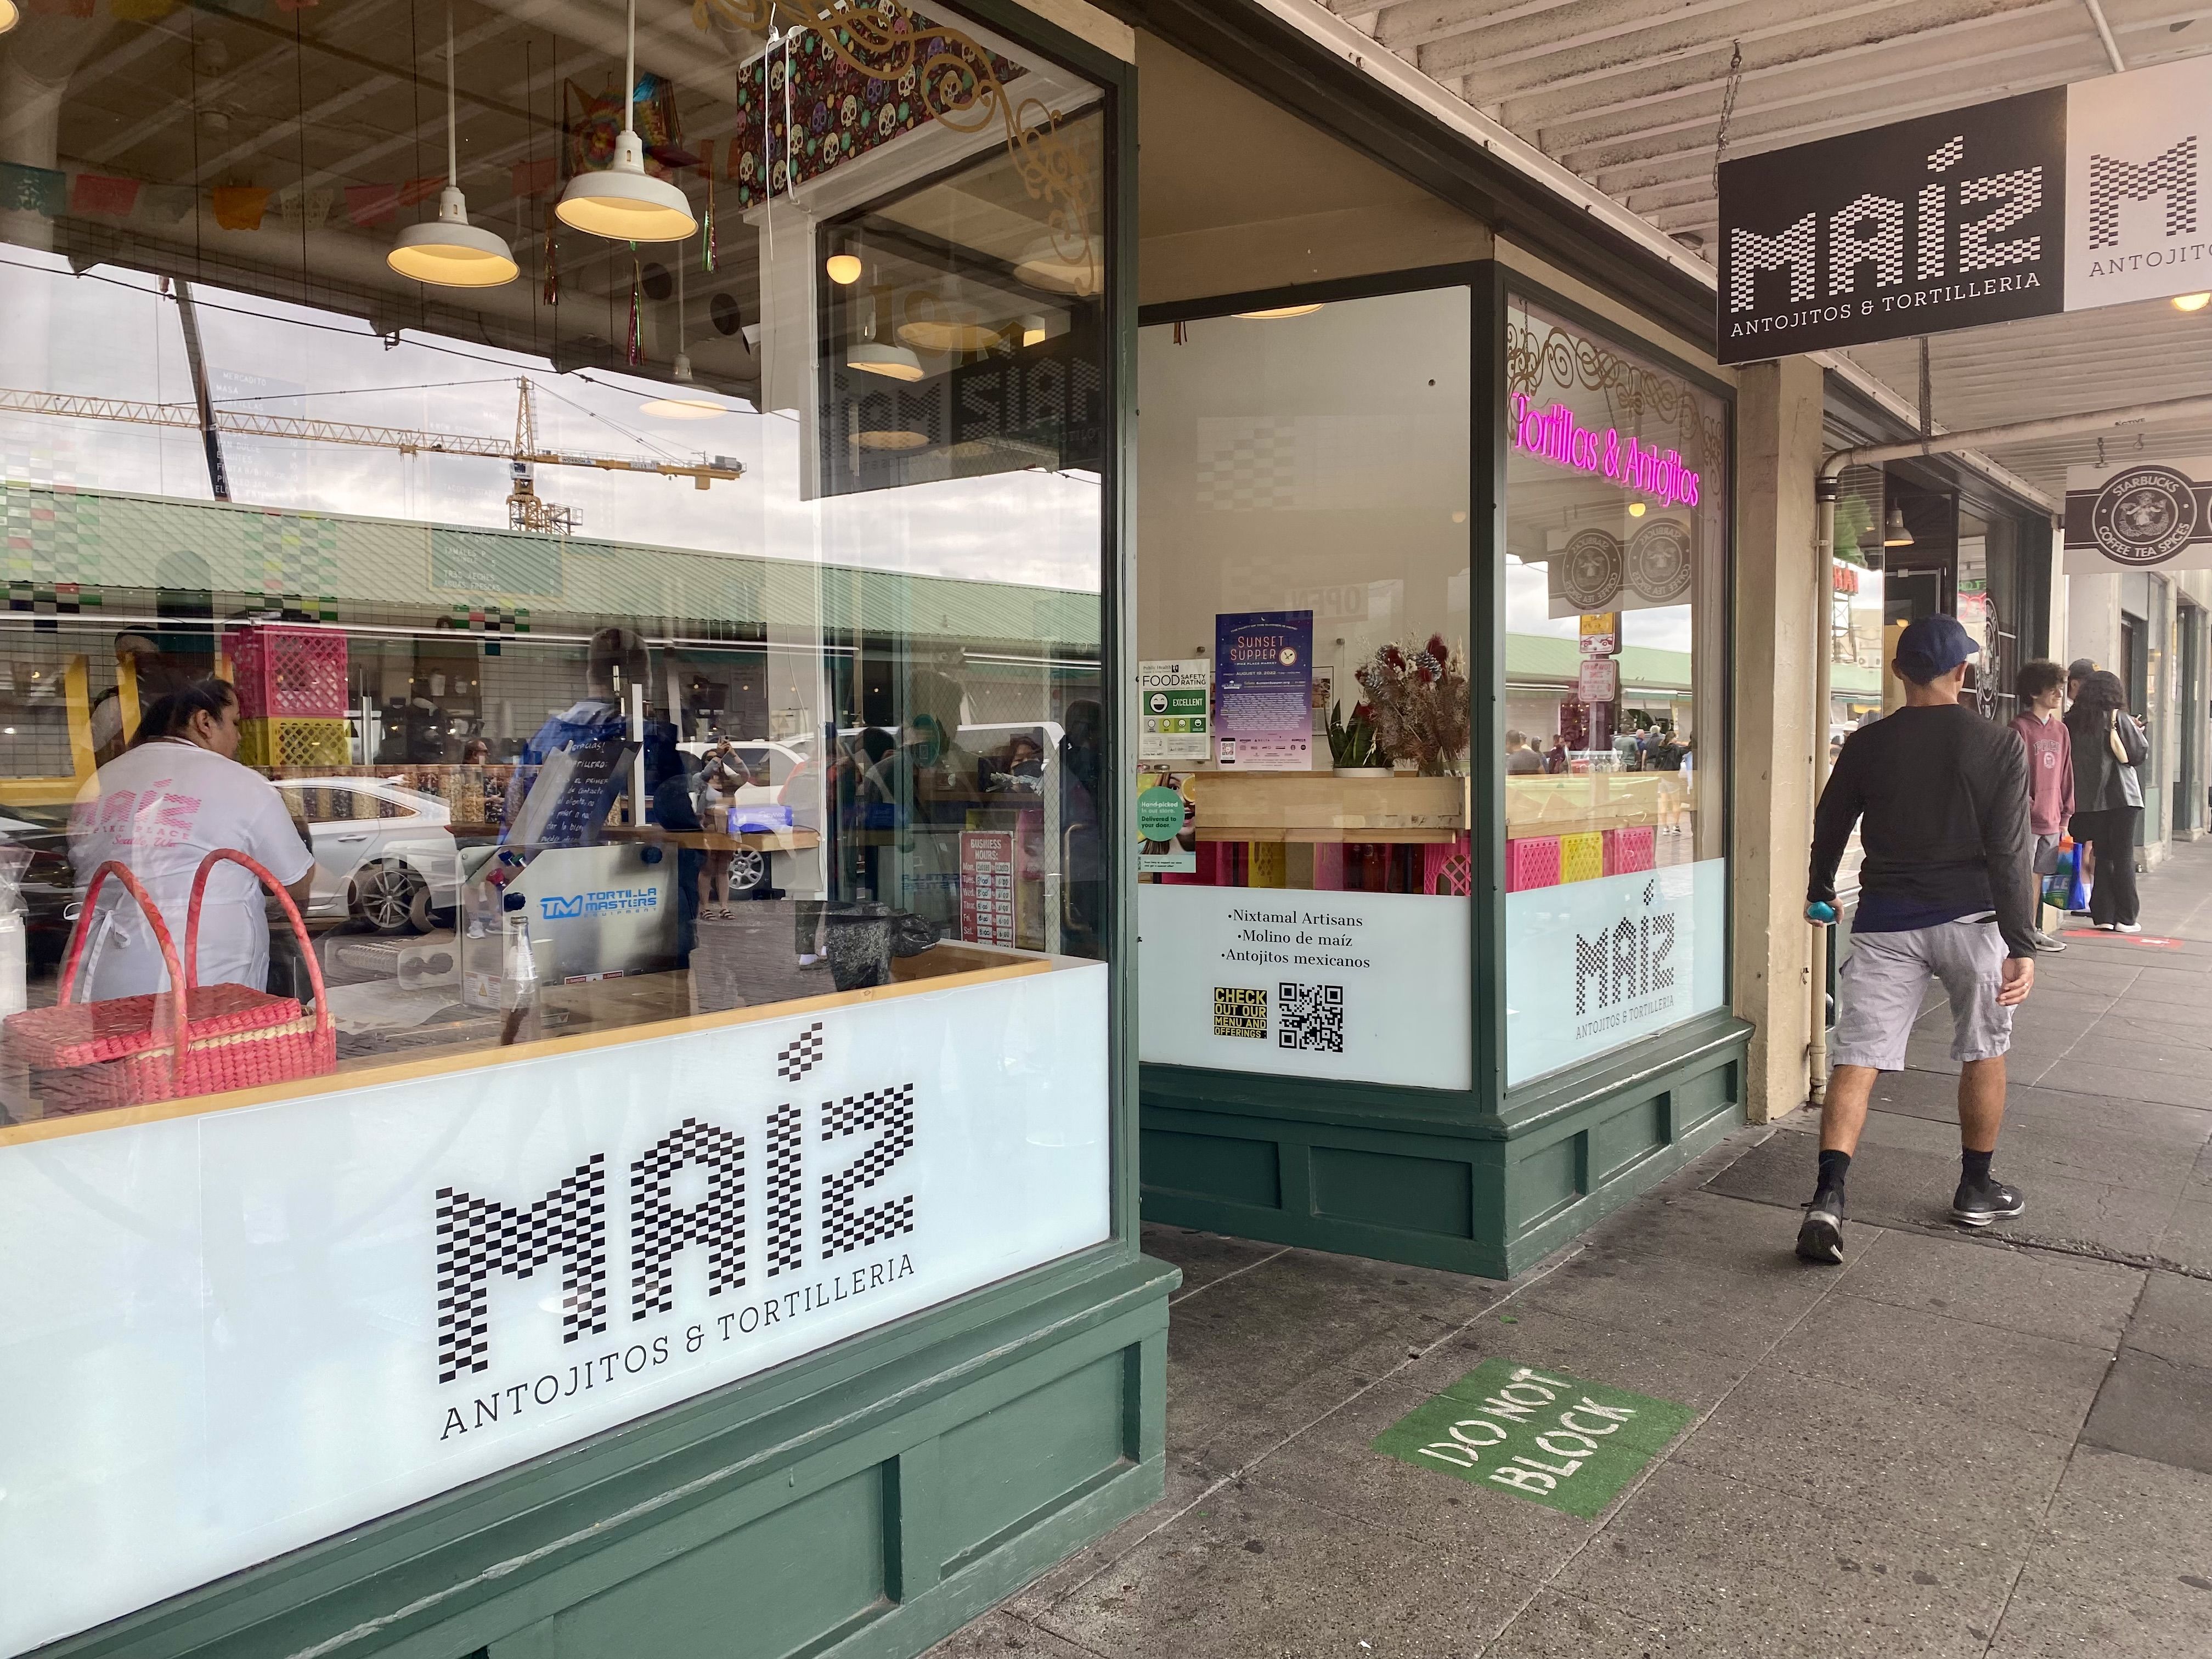 A storefront that says "Maiz" on the window, with someone walking by along the sidewalk.